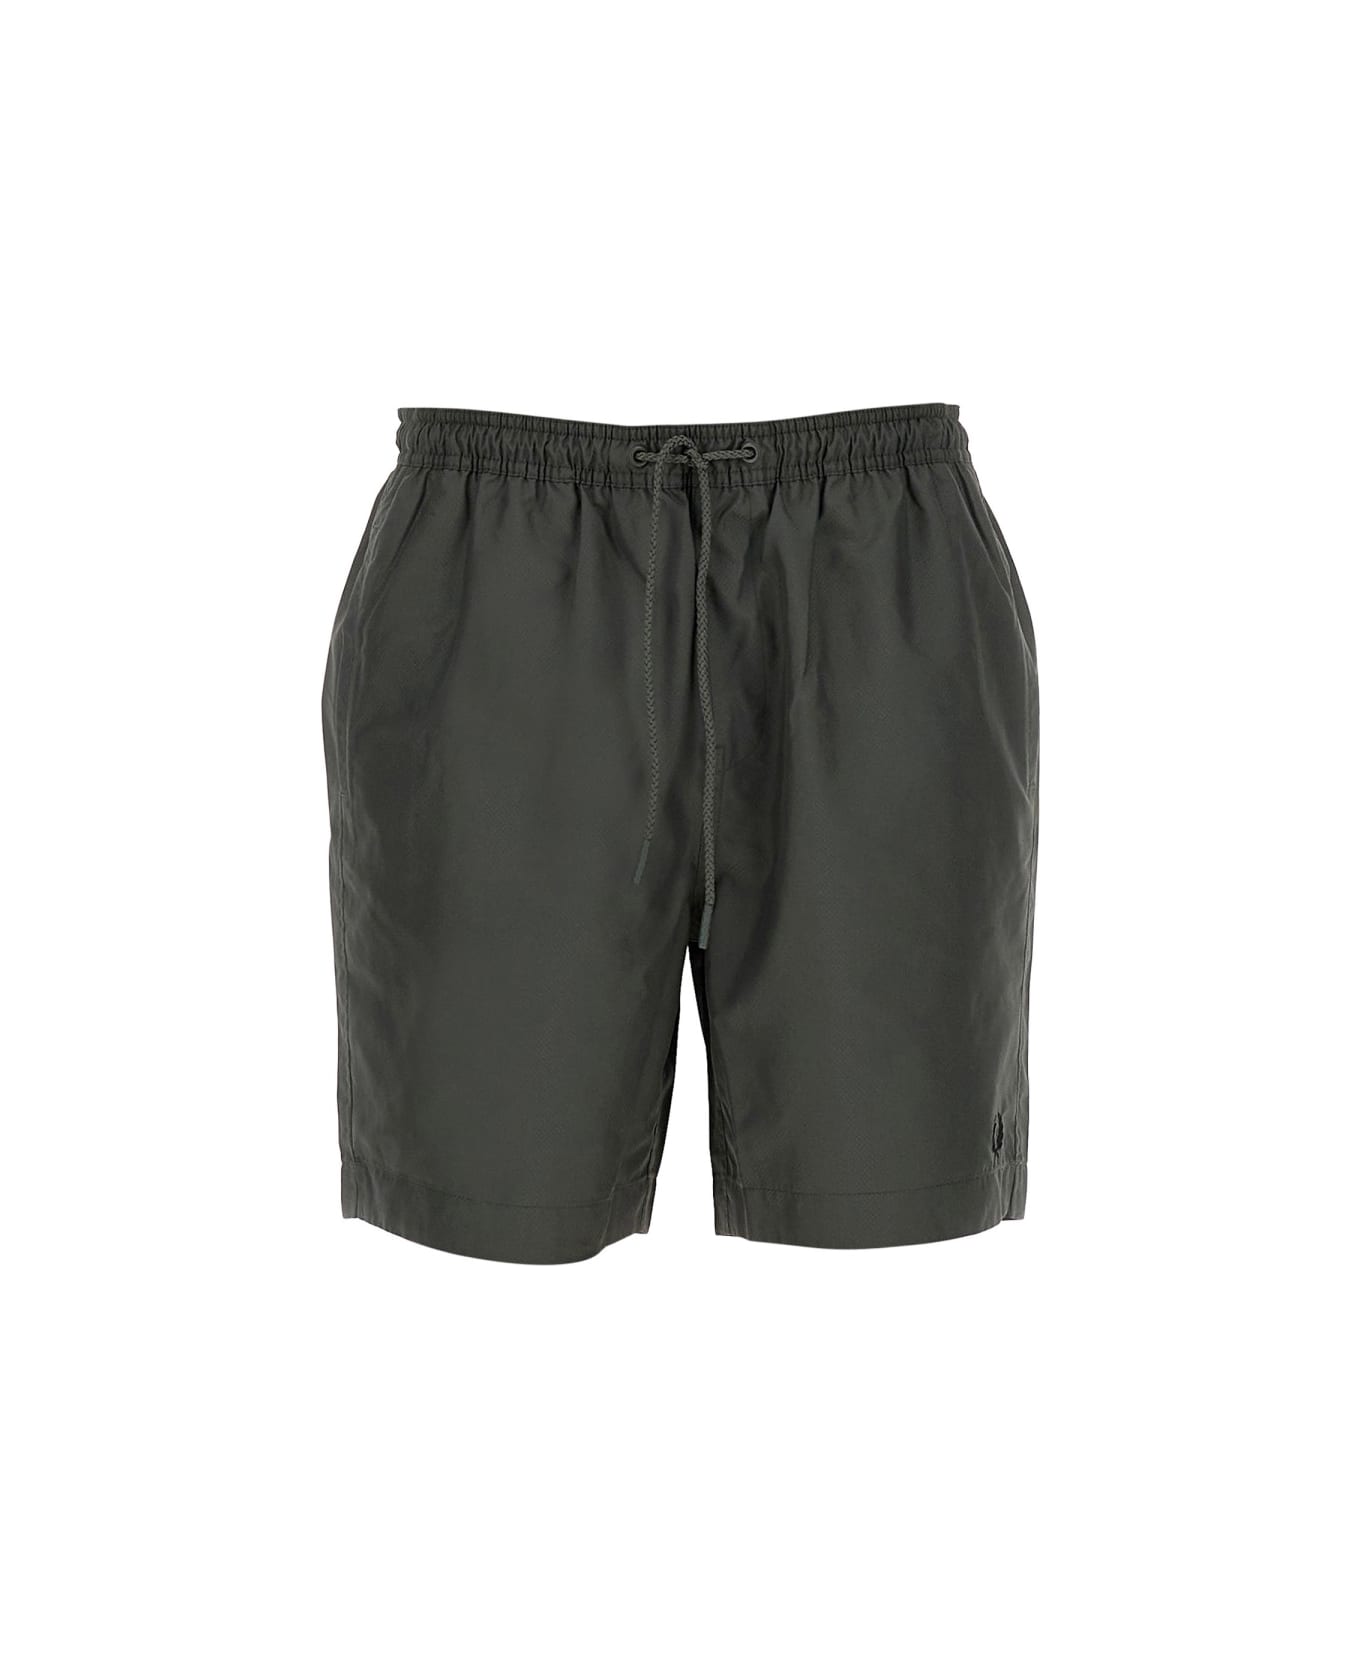 Fred Perry Swimsuit - MILITARY GREEN